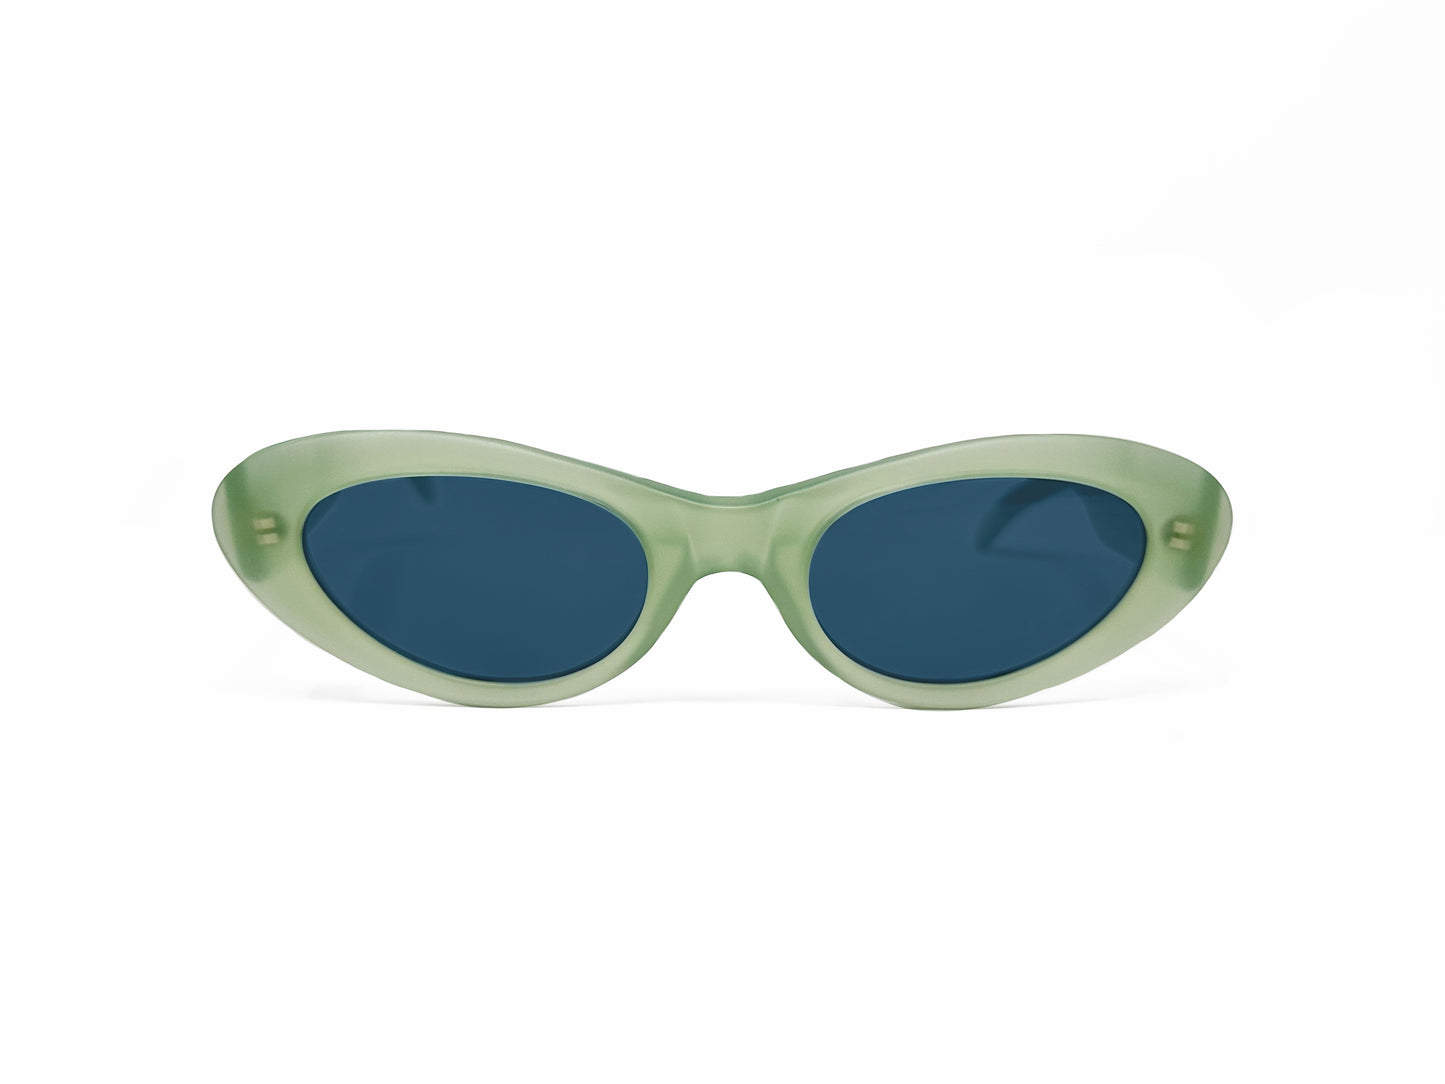 Kador oval, cat-eye, acetate sunglasses. Model: 3. Color: 1653 - Mint  with blue lenses. Front view.